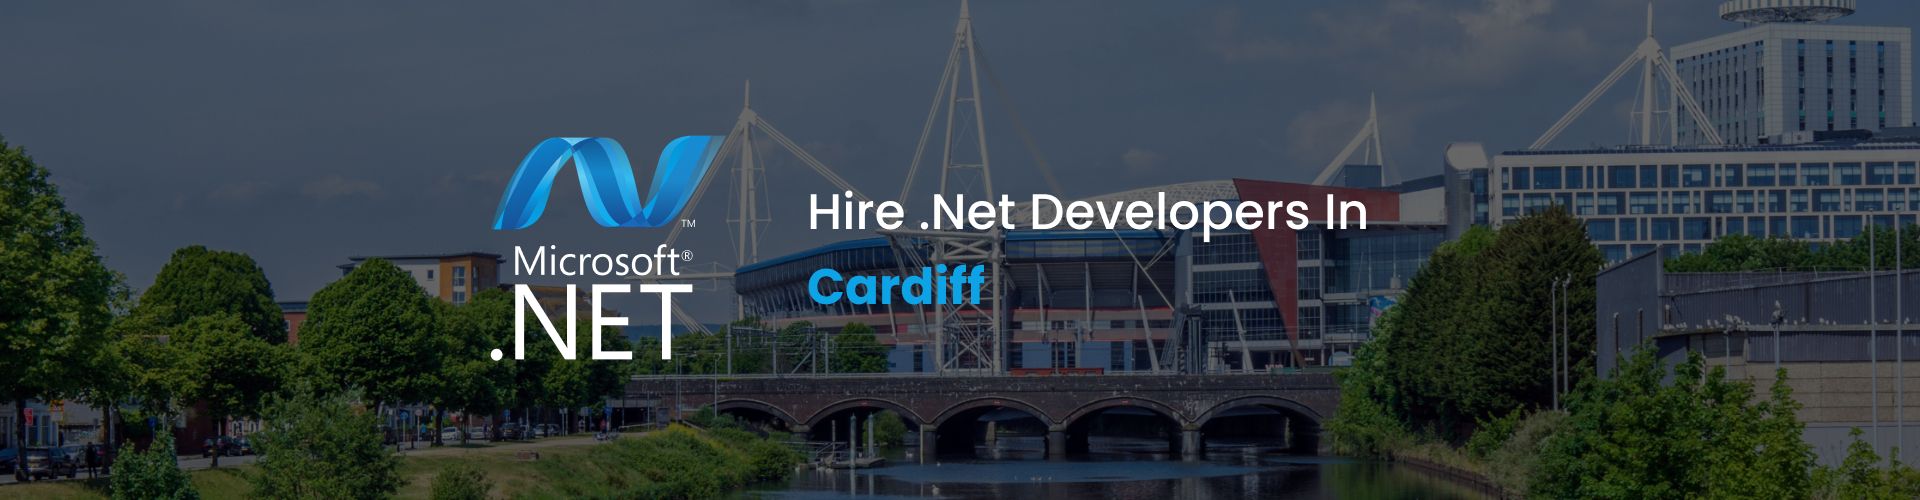 hire dot net developers in cardiff